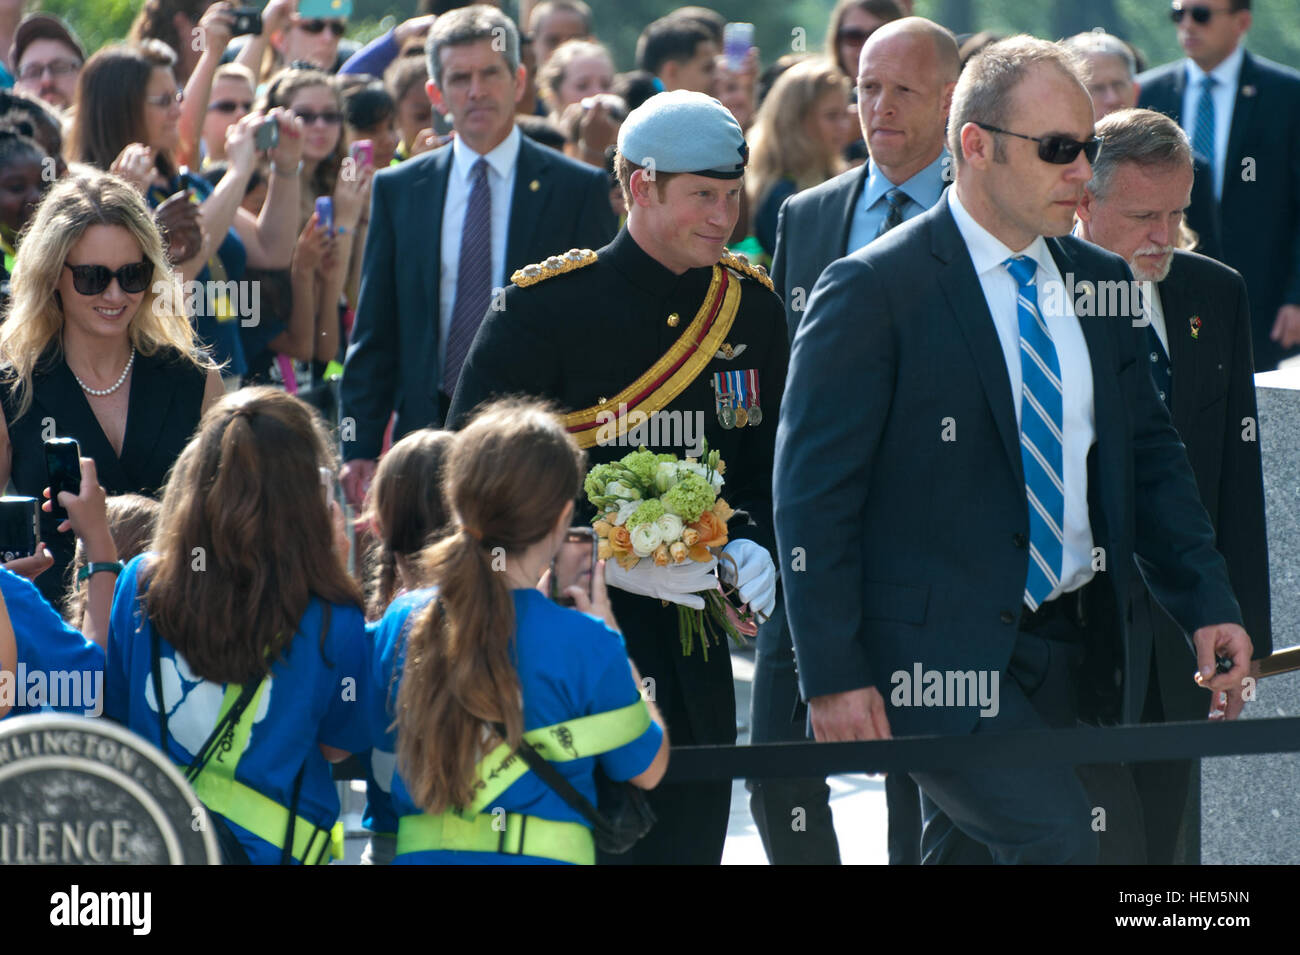 Britain's Prince Harry, center, arrives at President John F. Kennedy's gravesite at the Arlington National Cemetery, Va., May 10, 2013. (U.S. Army photo by Sgt. Laura Buchta/Released) Prince Harry of Wales Arlington visit 130510-A-VS818-179 Stock Photo